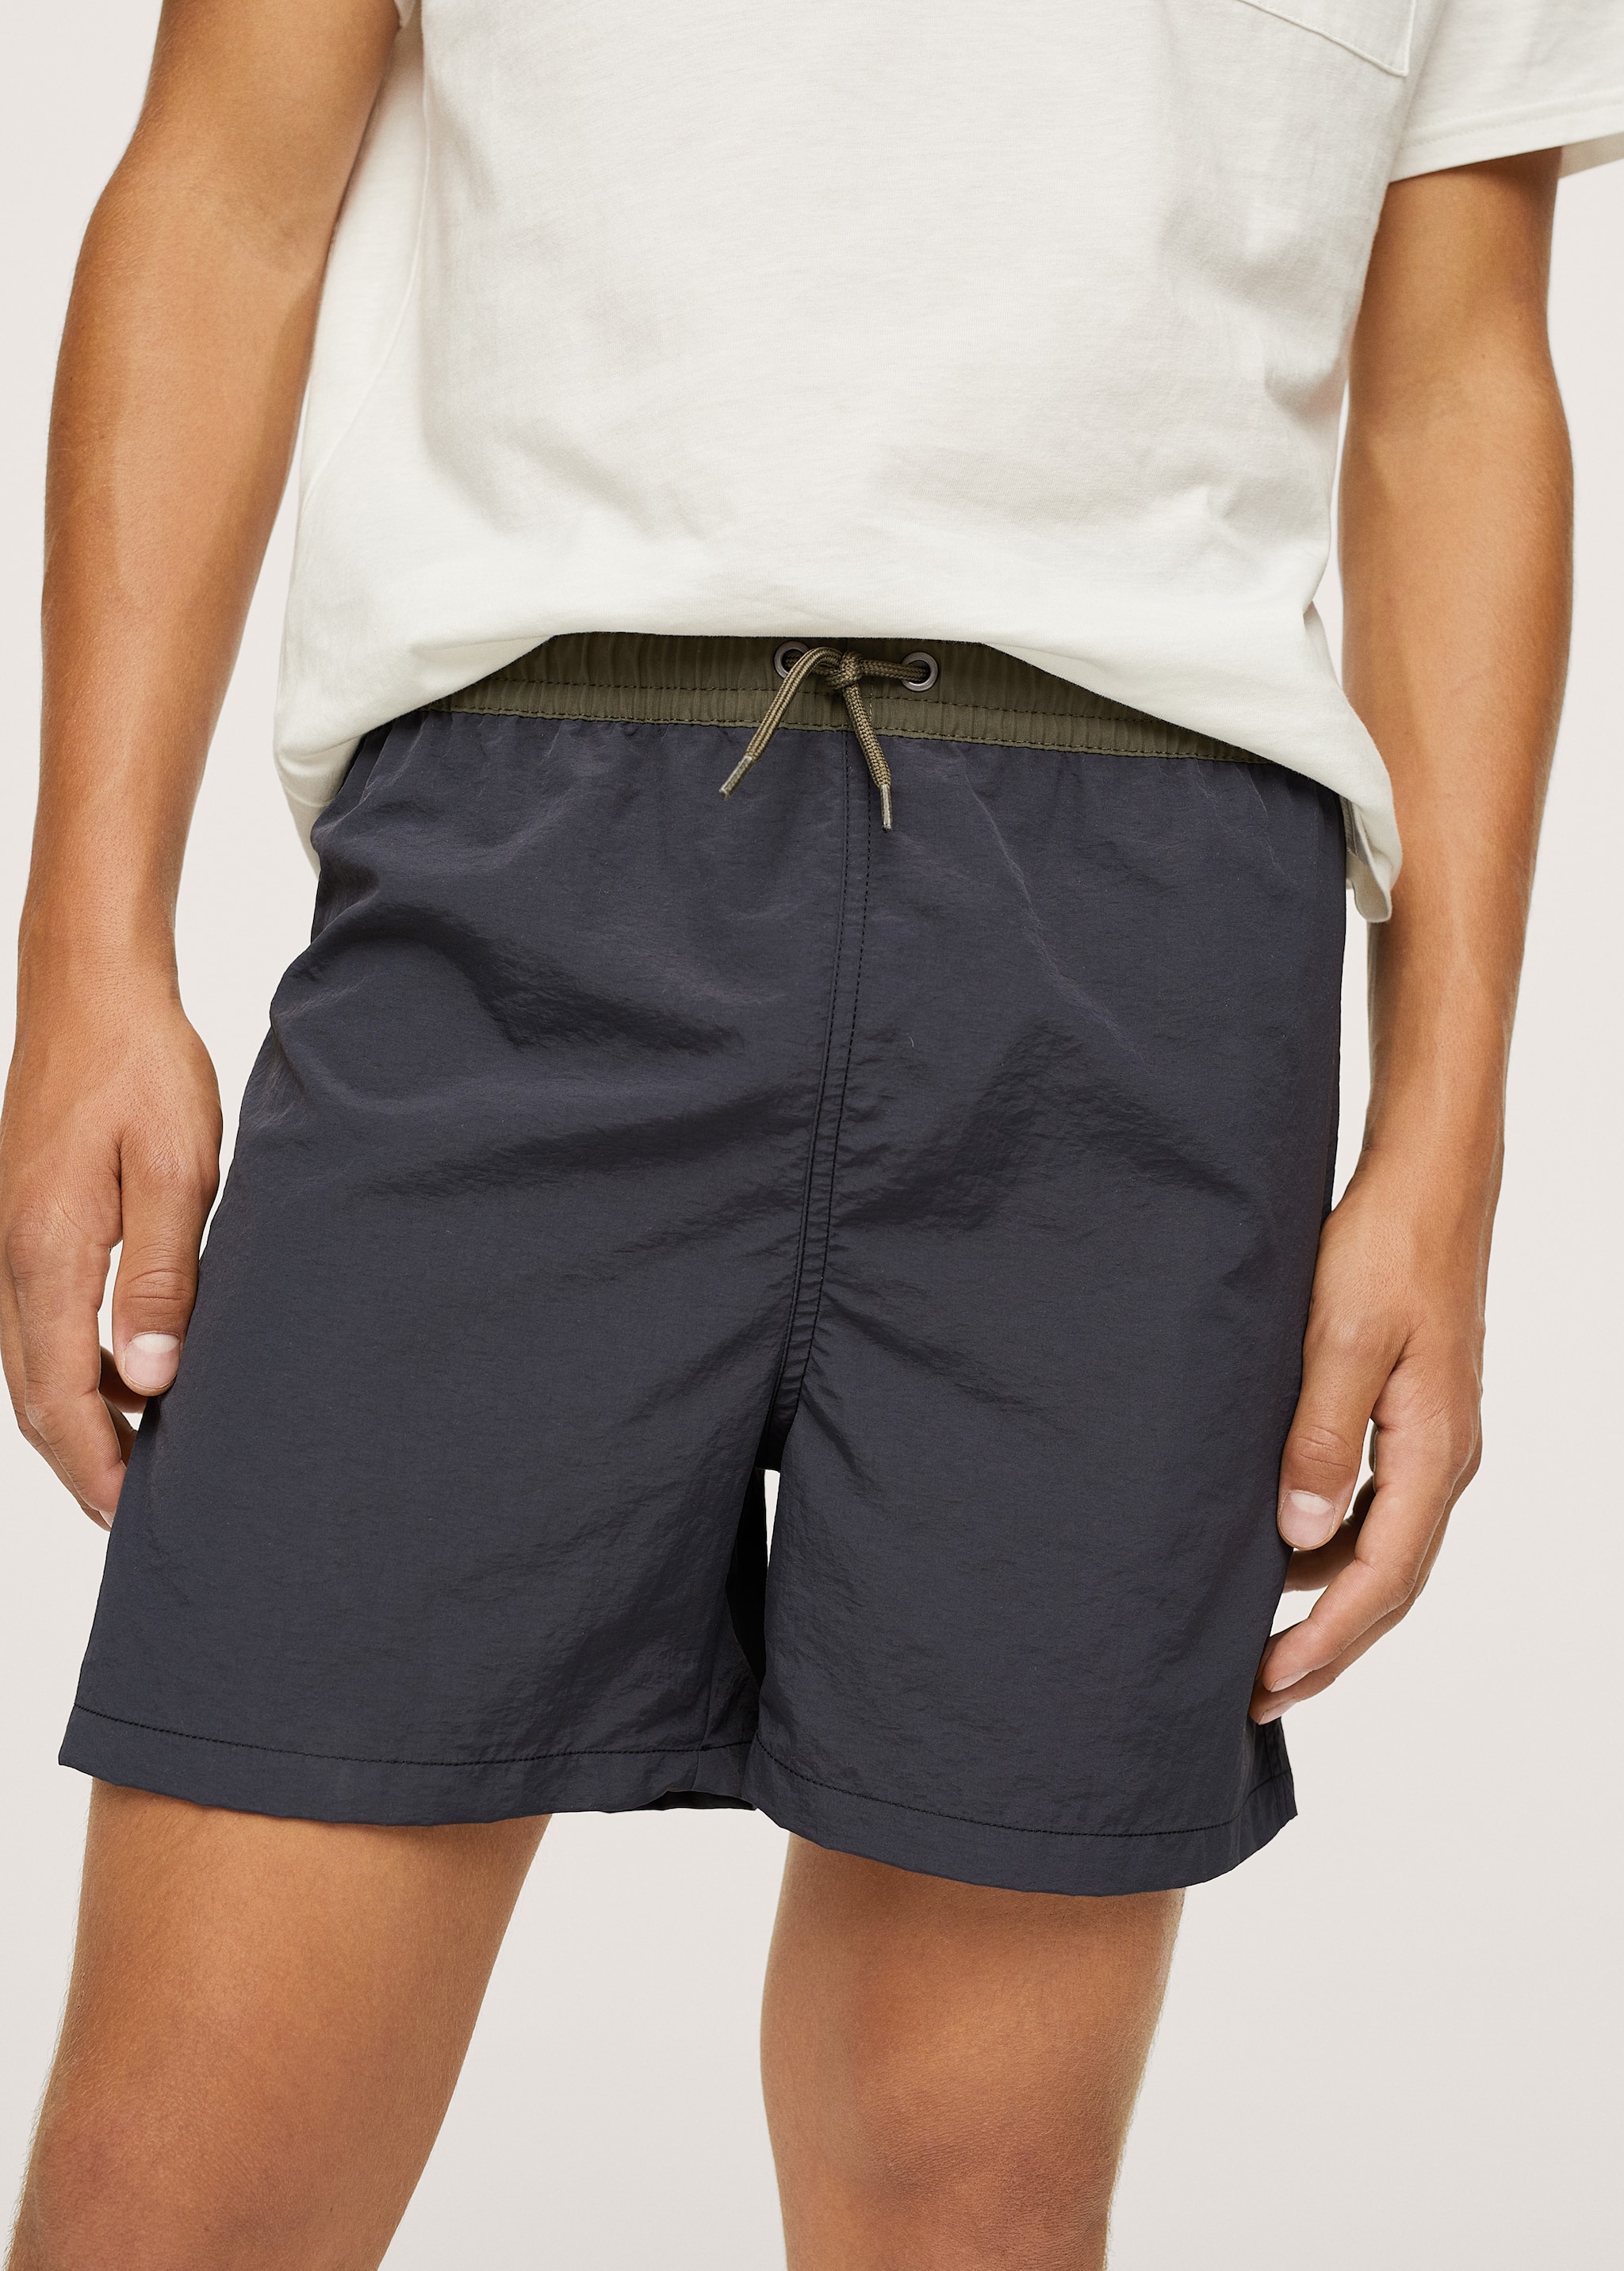 Basic two-tone swimming trunks - Details of the article 1